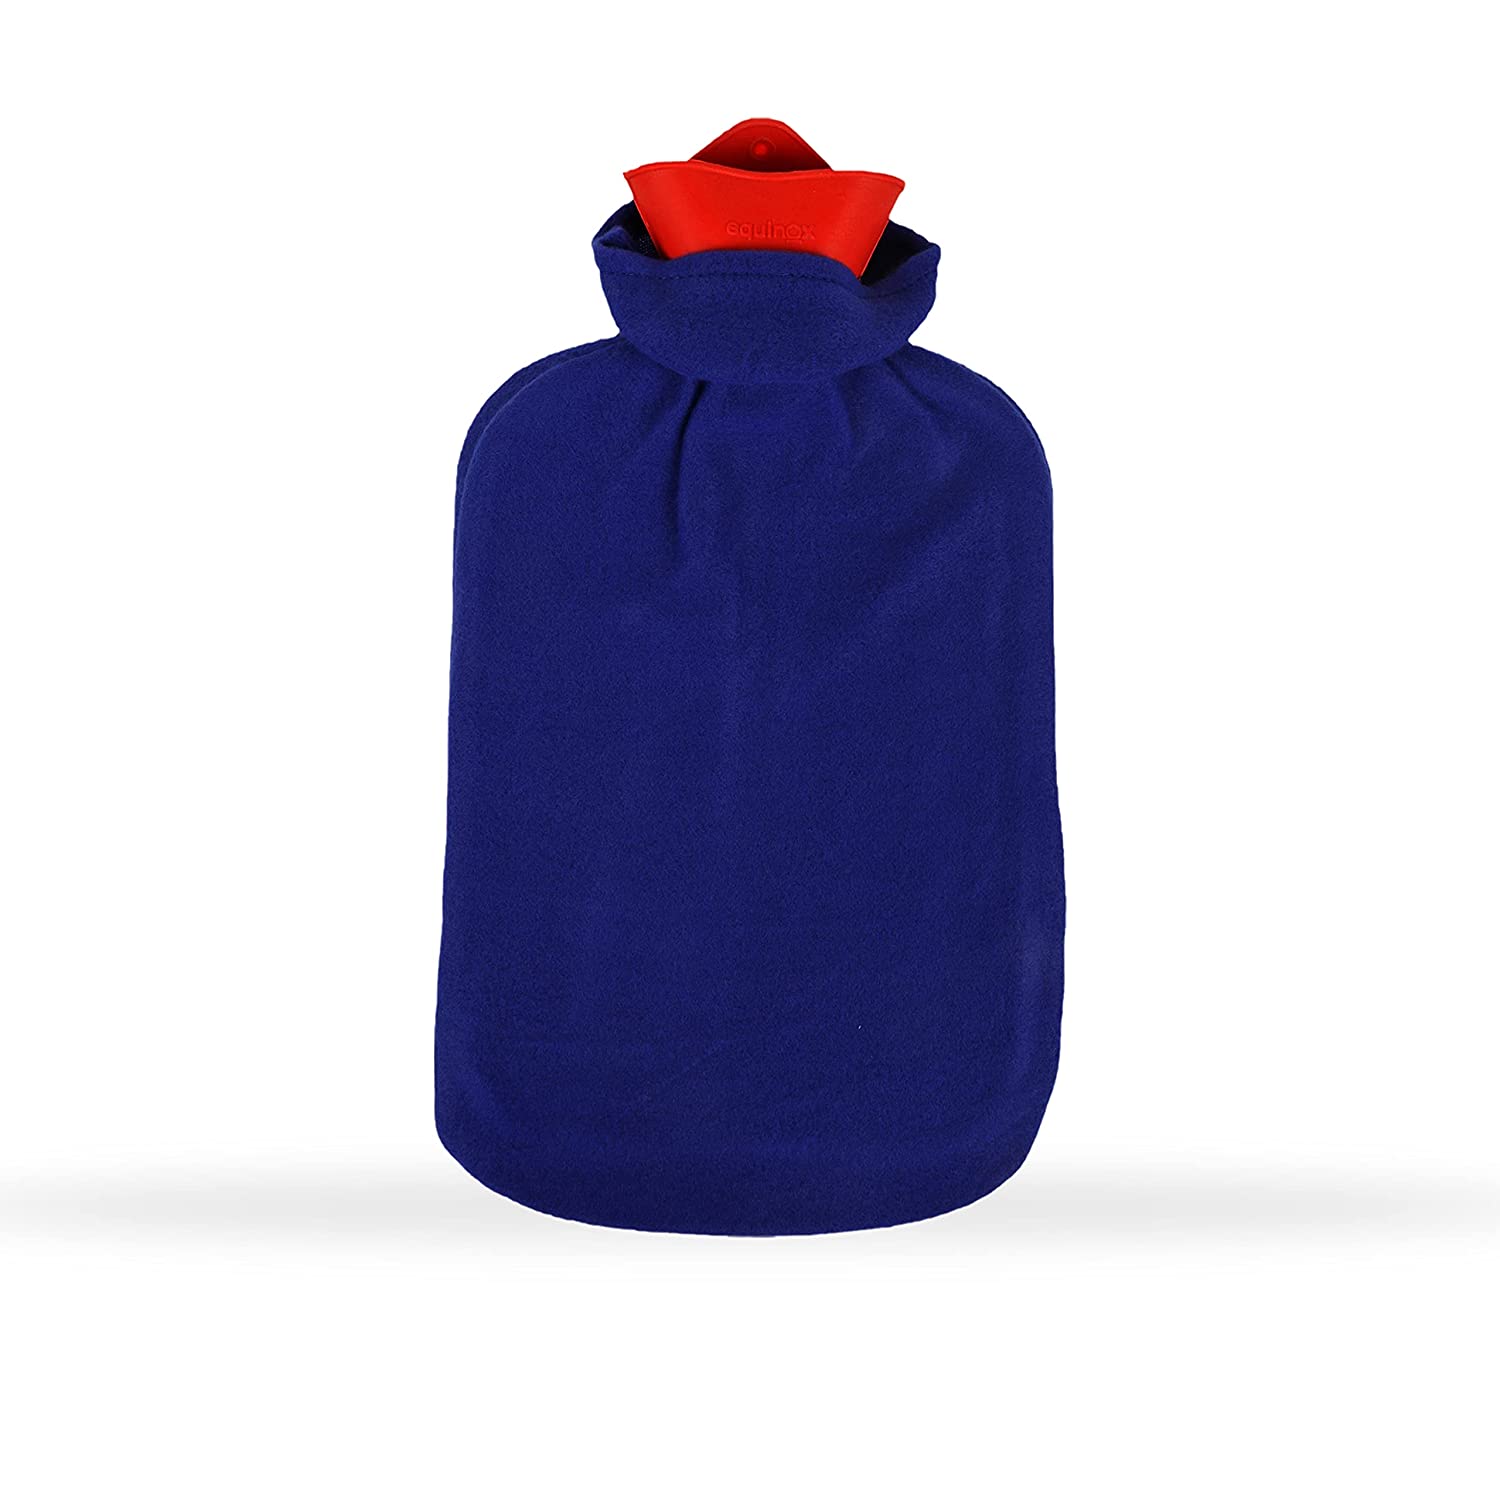 Equinox Hot Water Bottle with Cover EQ-HT-01 C(2 Litre)